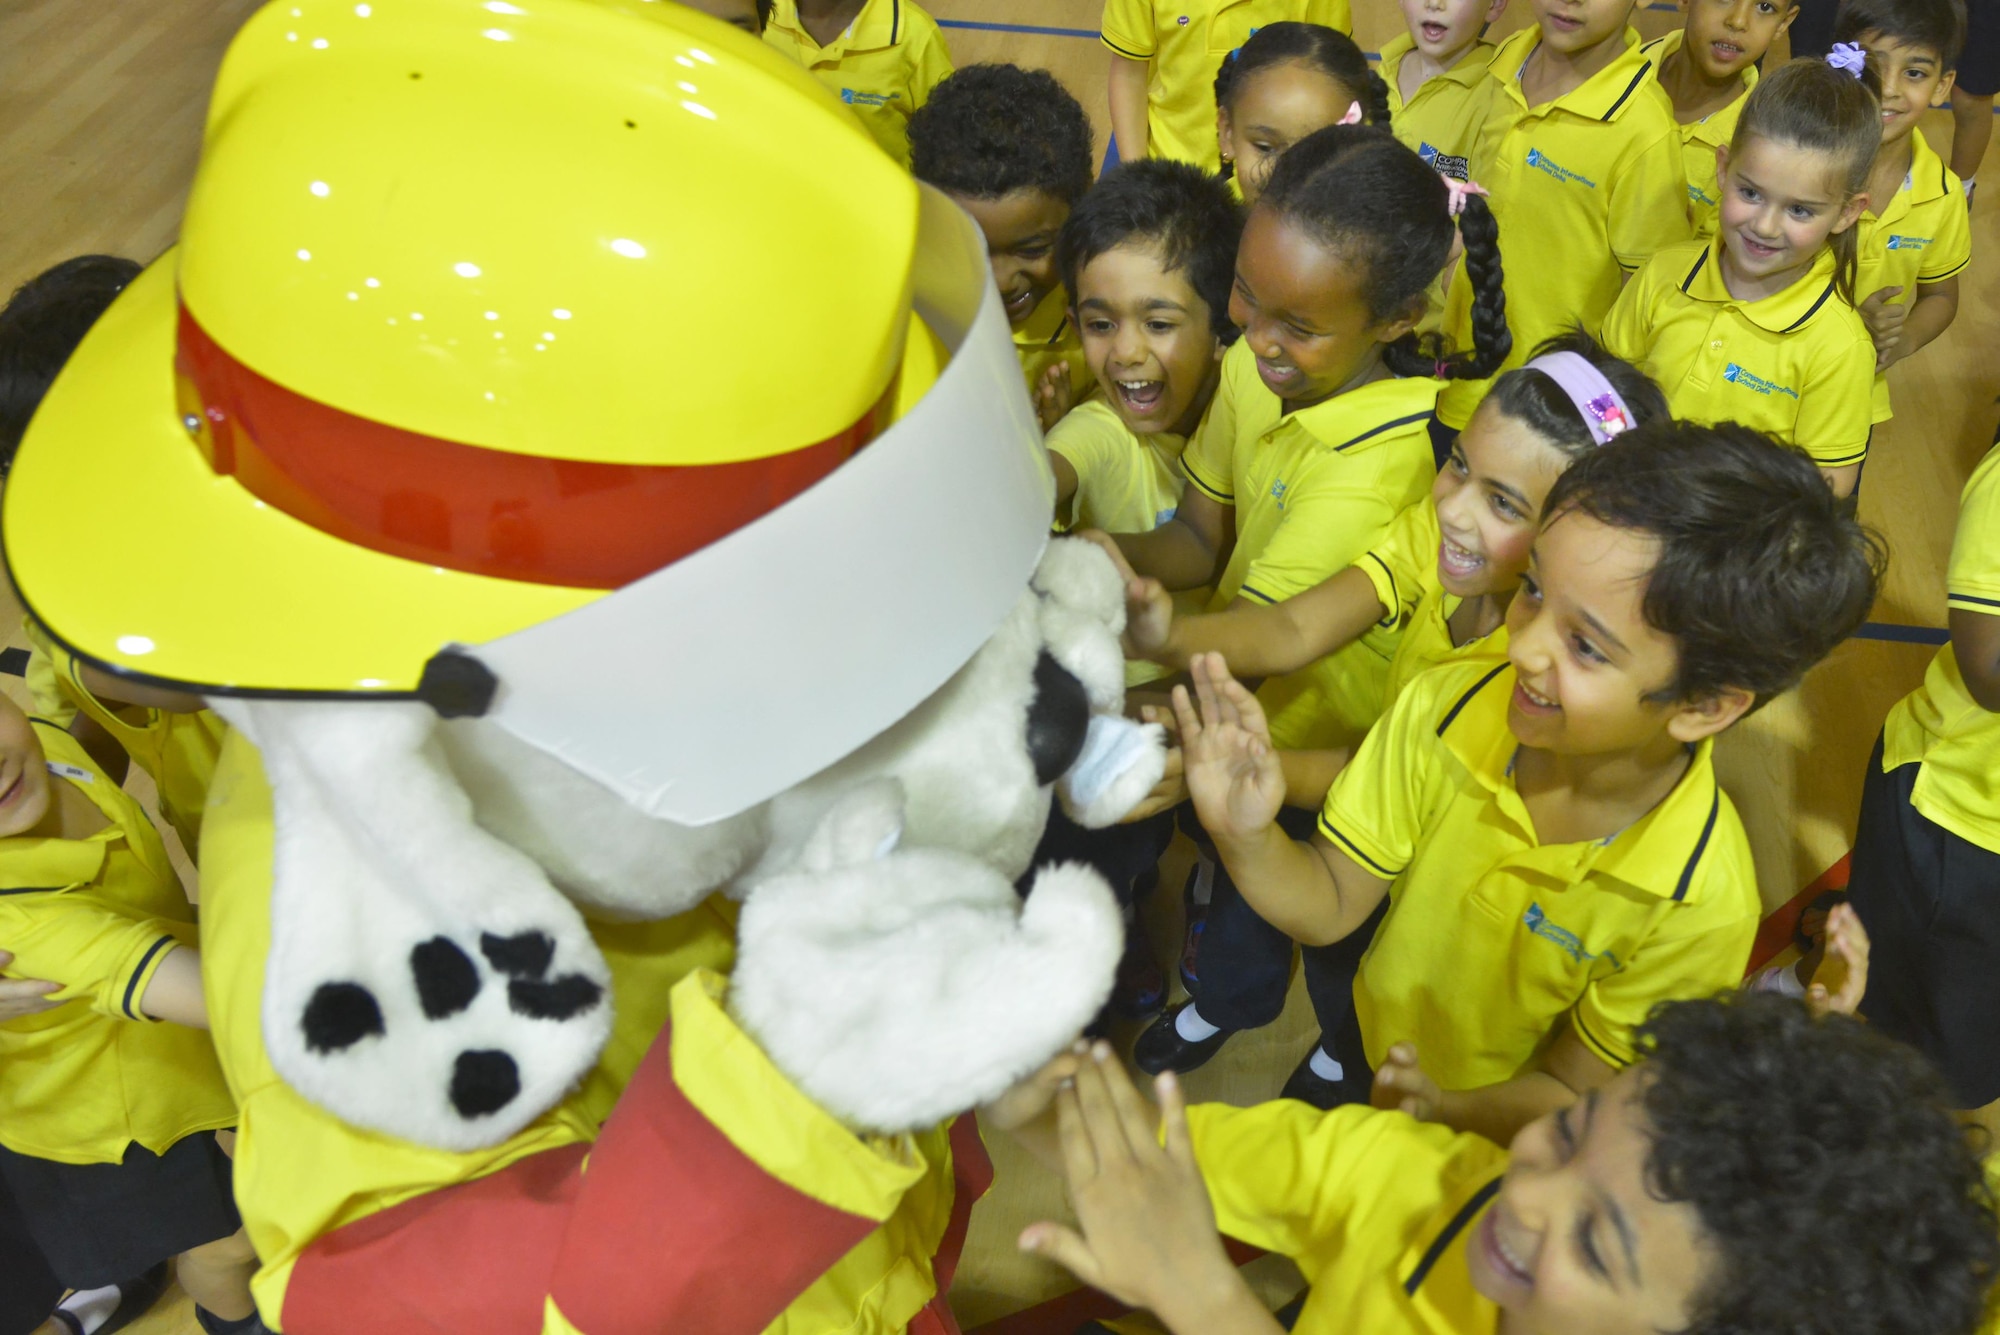 Students of the Compass International School Doha pet Sparky, National Fire Protection Association mascot during a visit as part of Fire Prevention Week educational seminars from airmen of the 379th Expeditionary Civil Engineer Squadron Fire Department October 8, 2015 in Doha, Qatar. During the visit, children were able to apply the skills taught and ask questions to further their learning. (U.S. Air Force photo/Staff Sgt. Alexandre Montes)